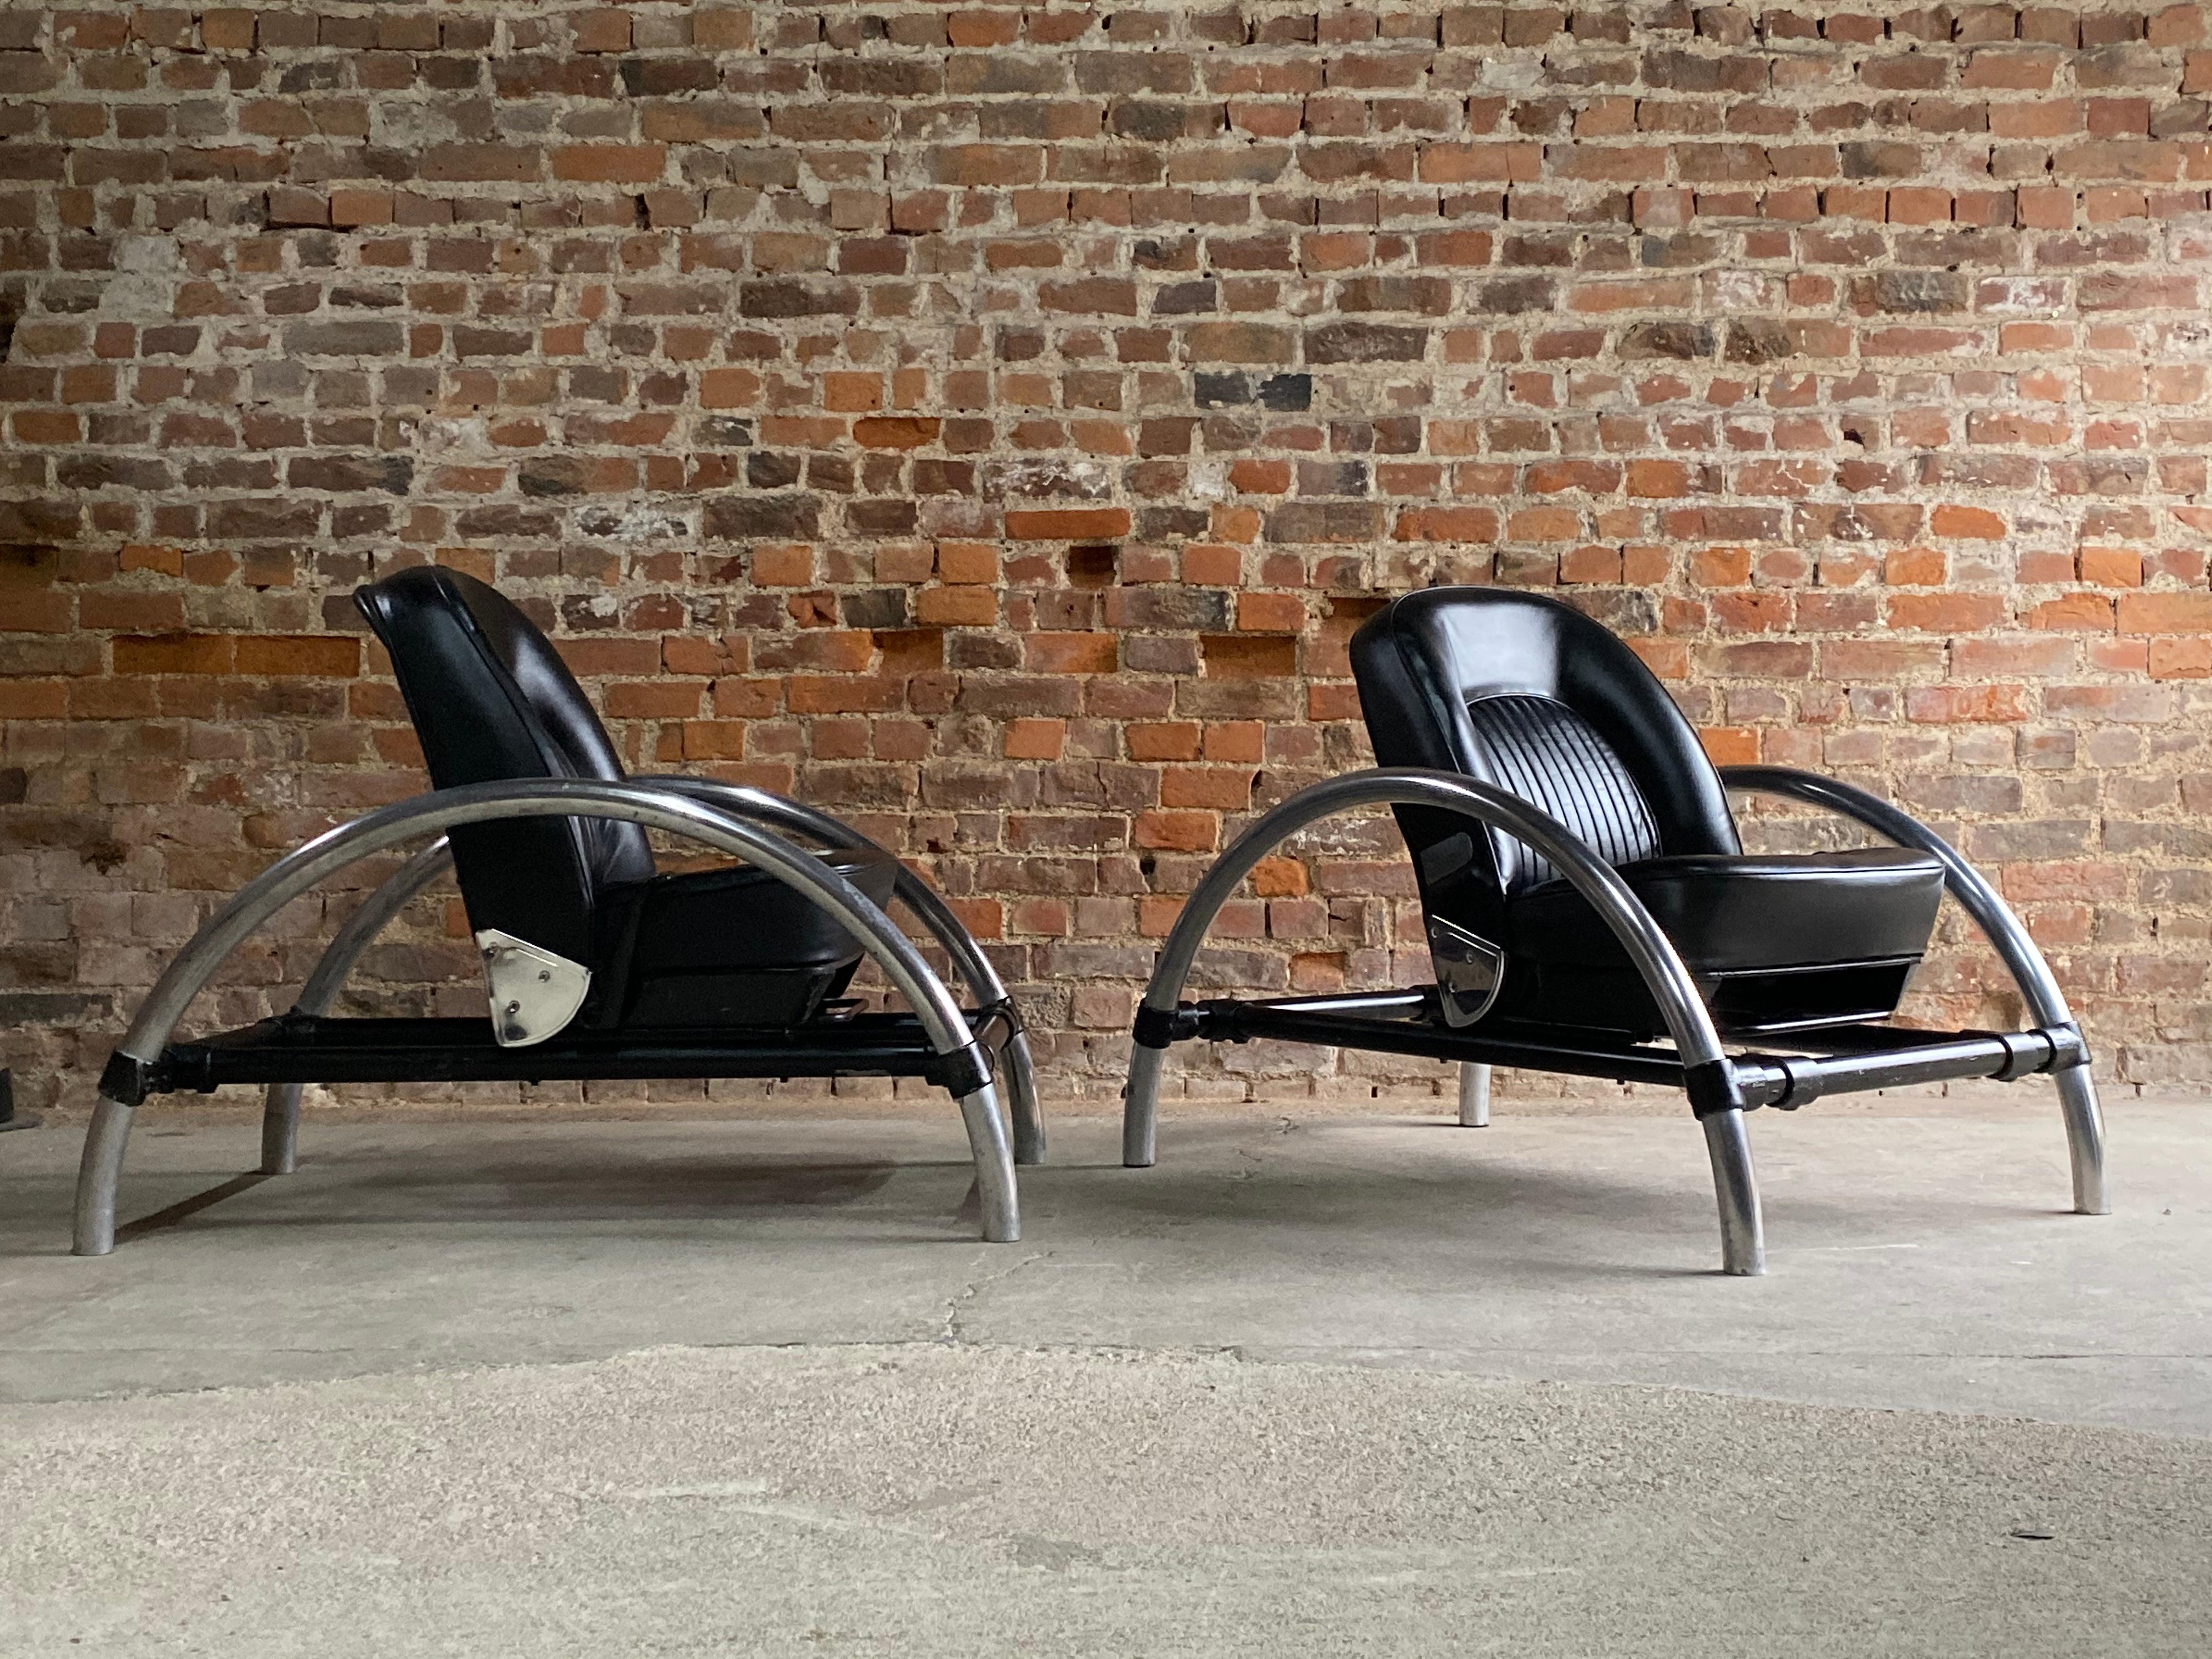 Industrial Ron Arad Rover Chairs Pair by One Off Ltd, circa 1981